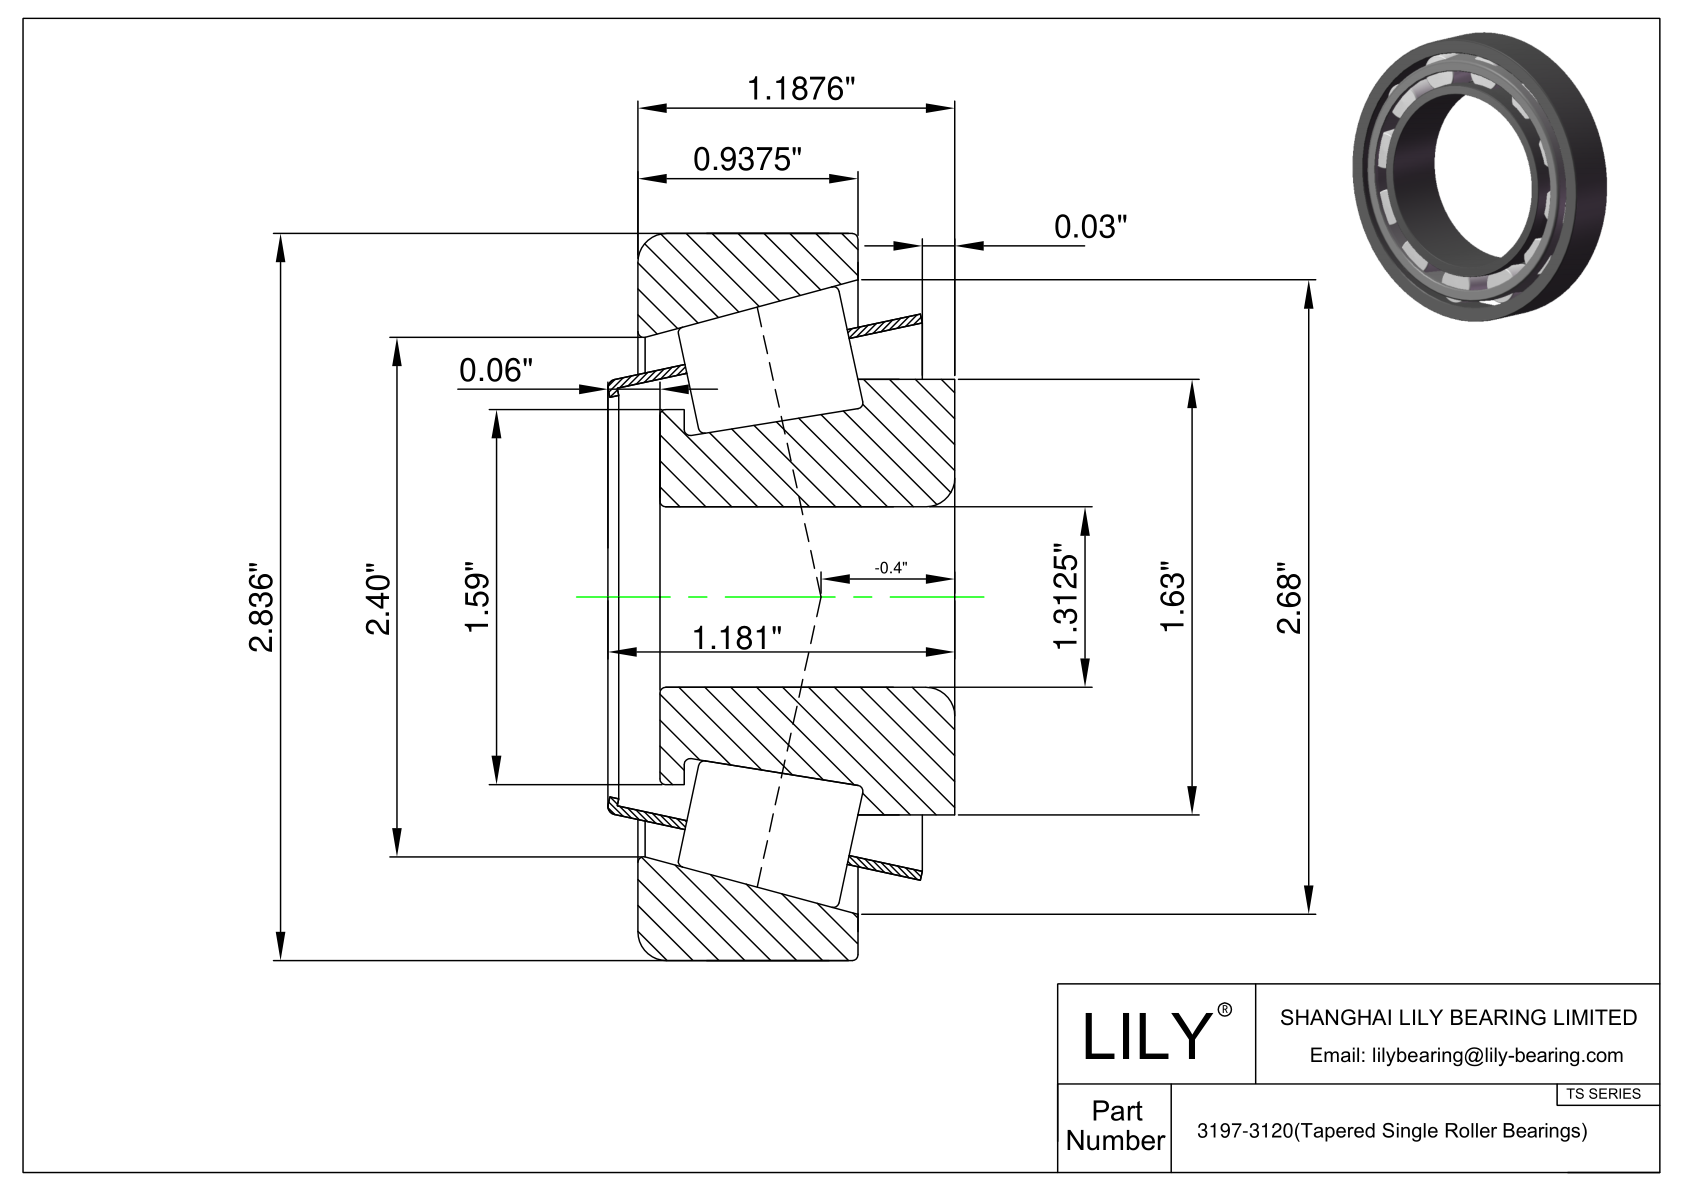 3197-3126 TS (Tapered Single Roller Bearings) (Imperial) cad drawing